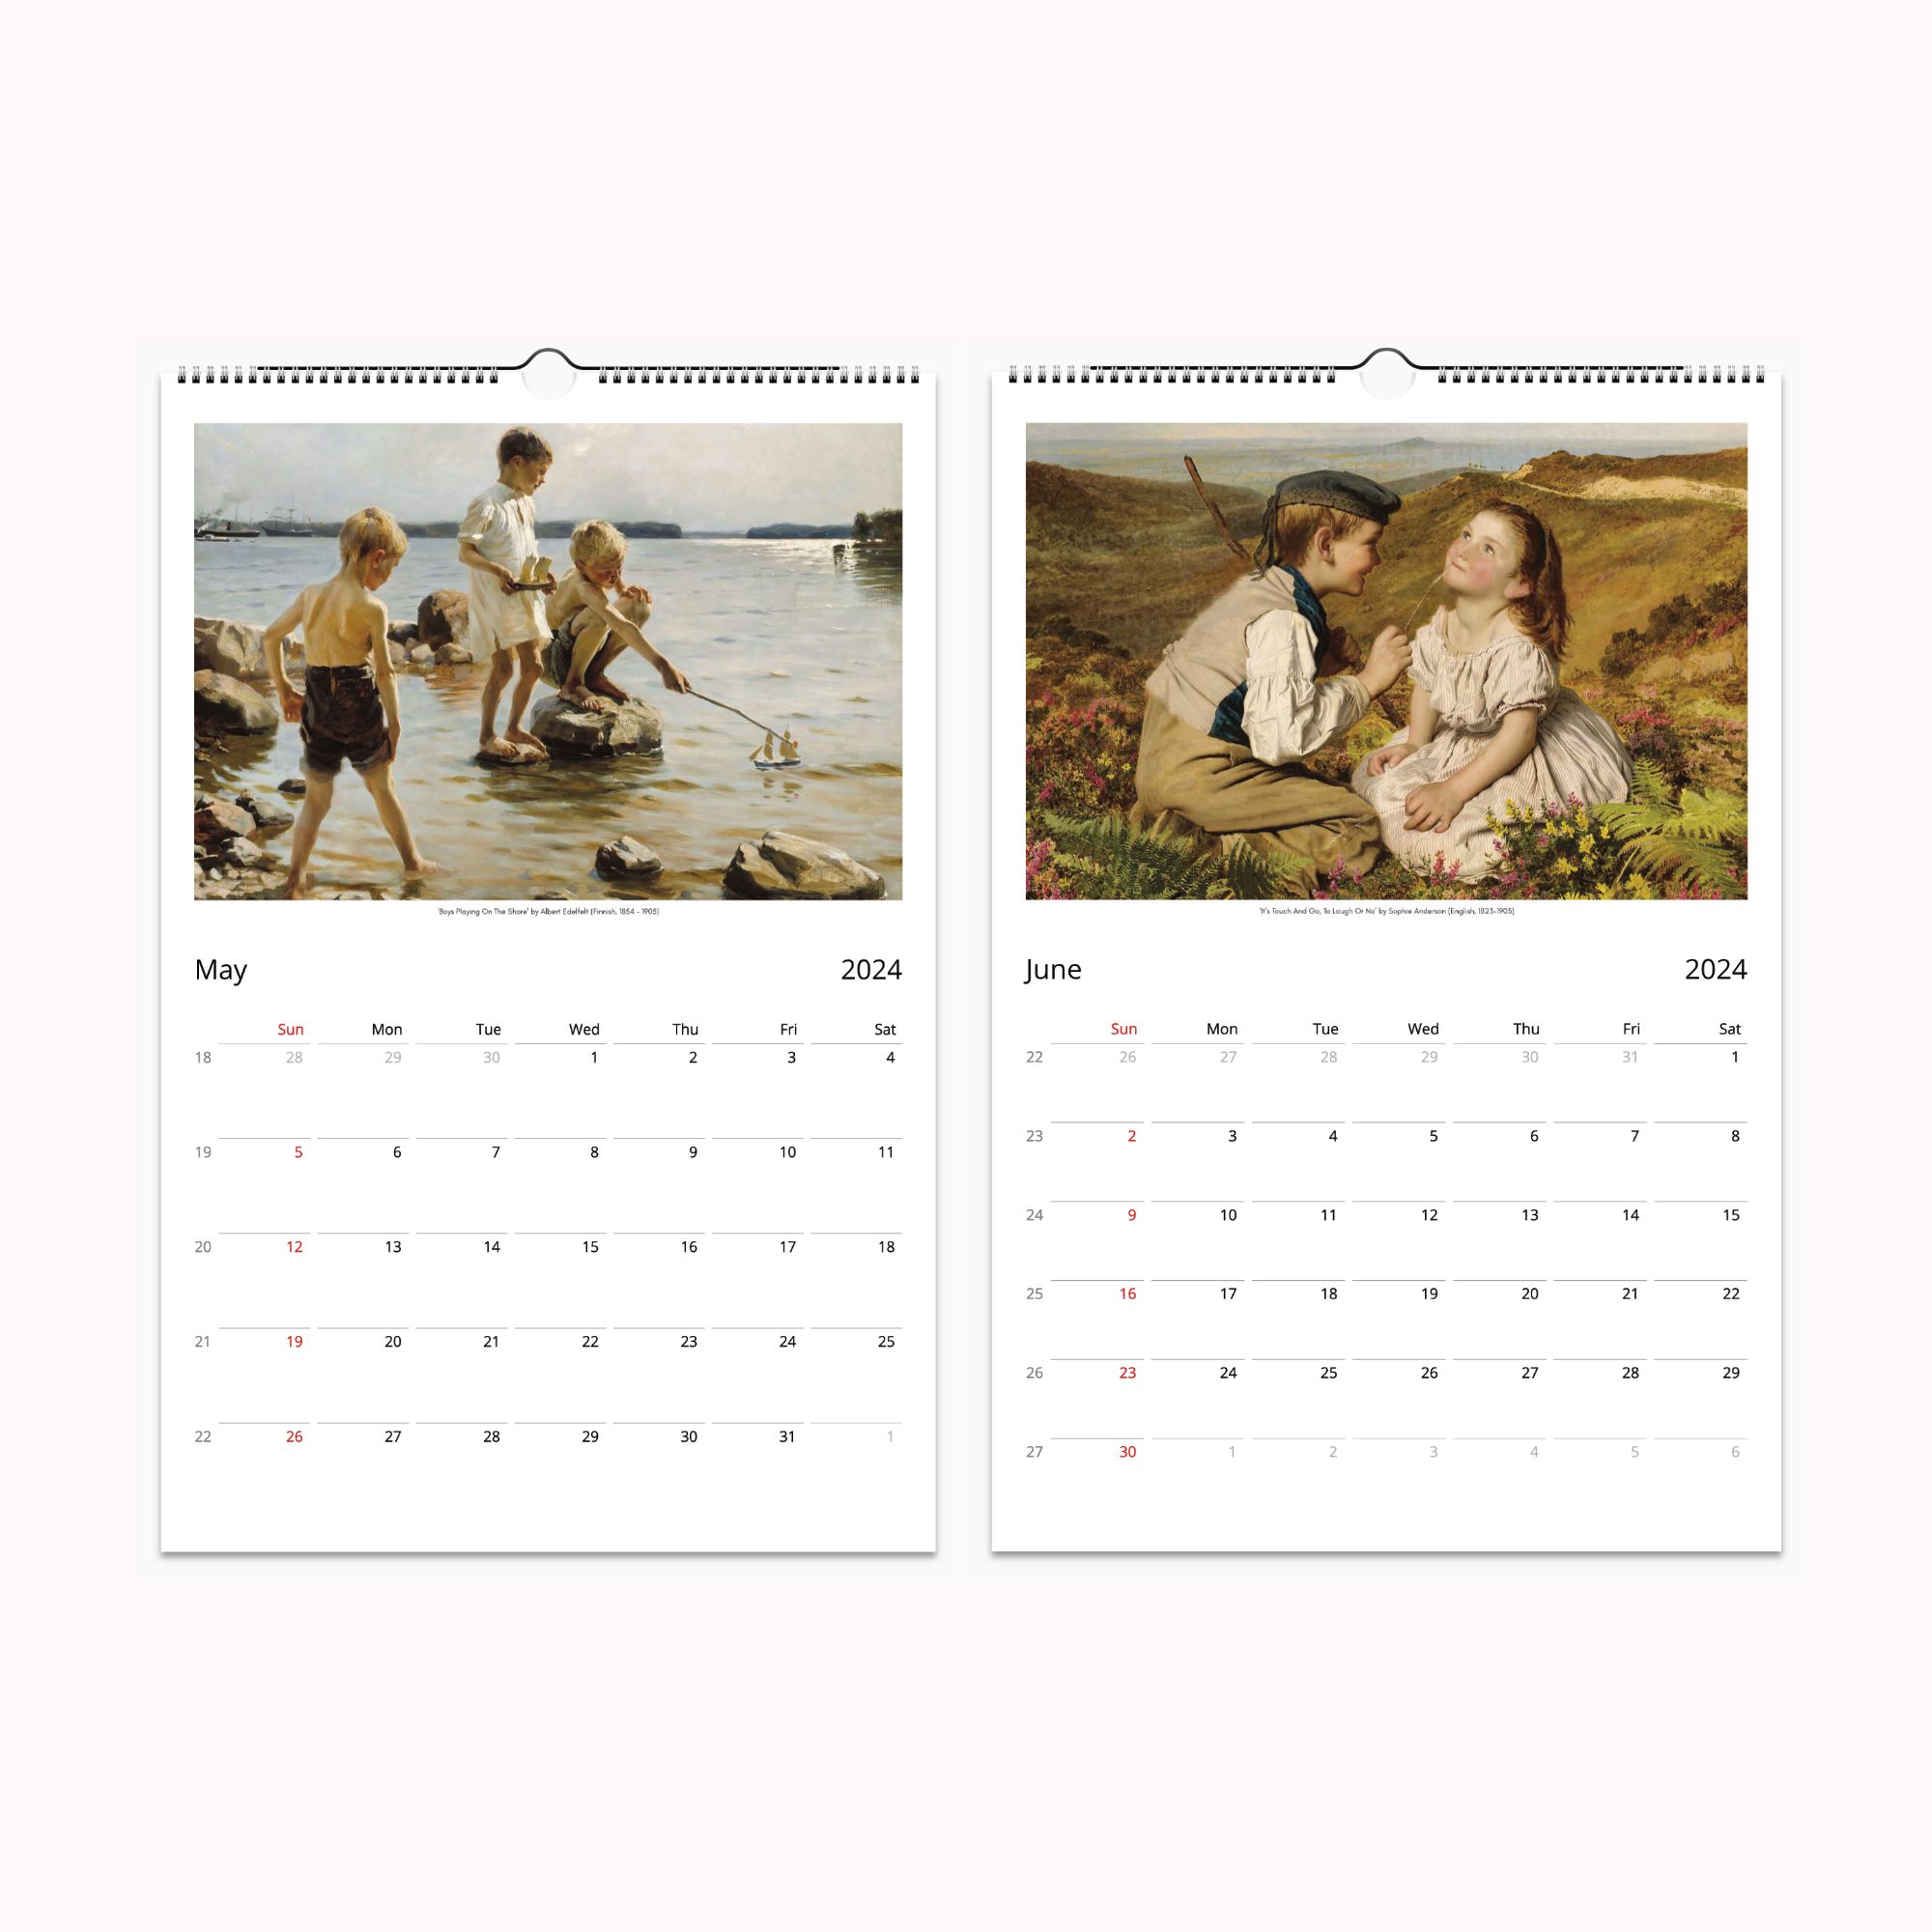 2024 Wall Calendar 'Who Spilled the Paint - An Artful Mess of 2024' with Cottagecore Art by American Artists - Ideal Gift for Teachers and Art Enthusiasts, Featuring Framable Miniature Art Masterpieces.